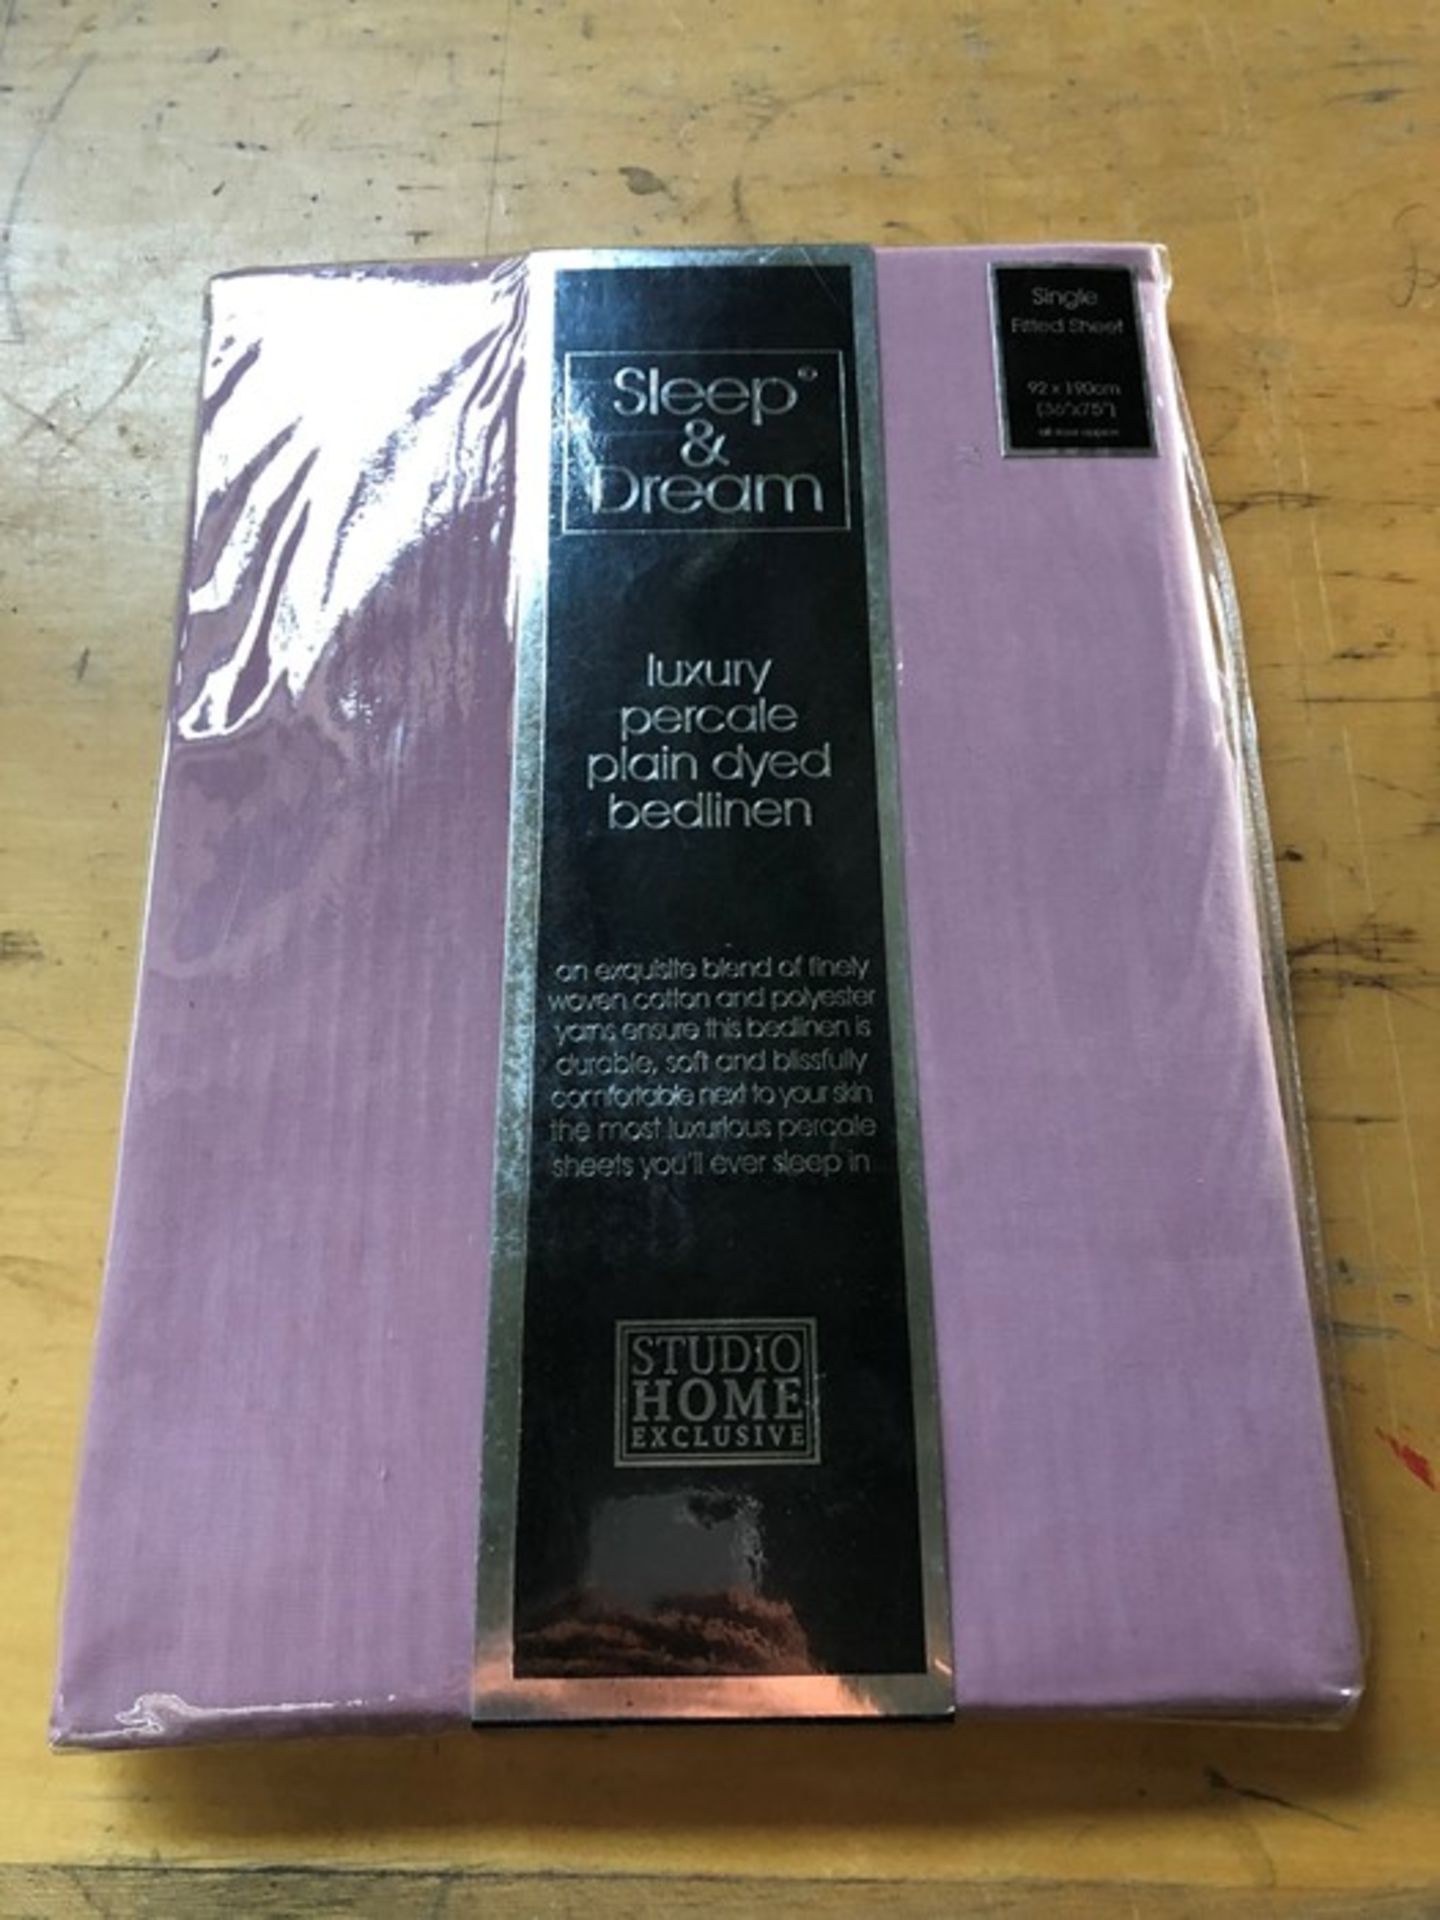 1 SLEEP AND DREAM LUXURY PERCALE PLAIN DYED FITTED SHEET - DUSKY PINK / SIZE: 36 X 75"